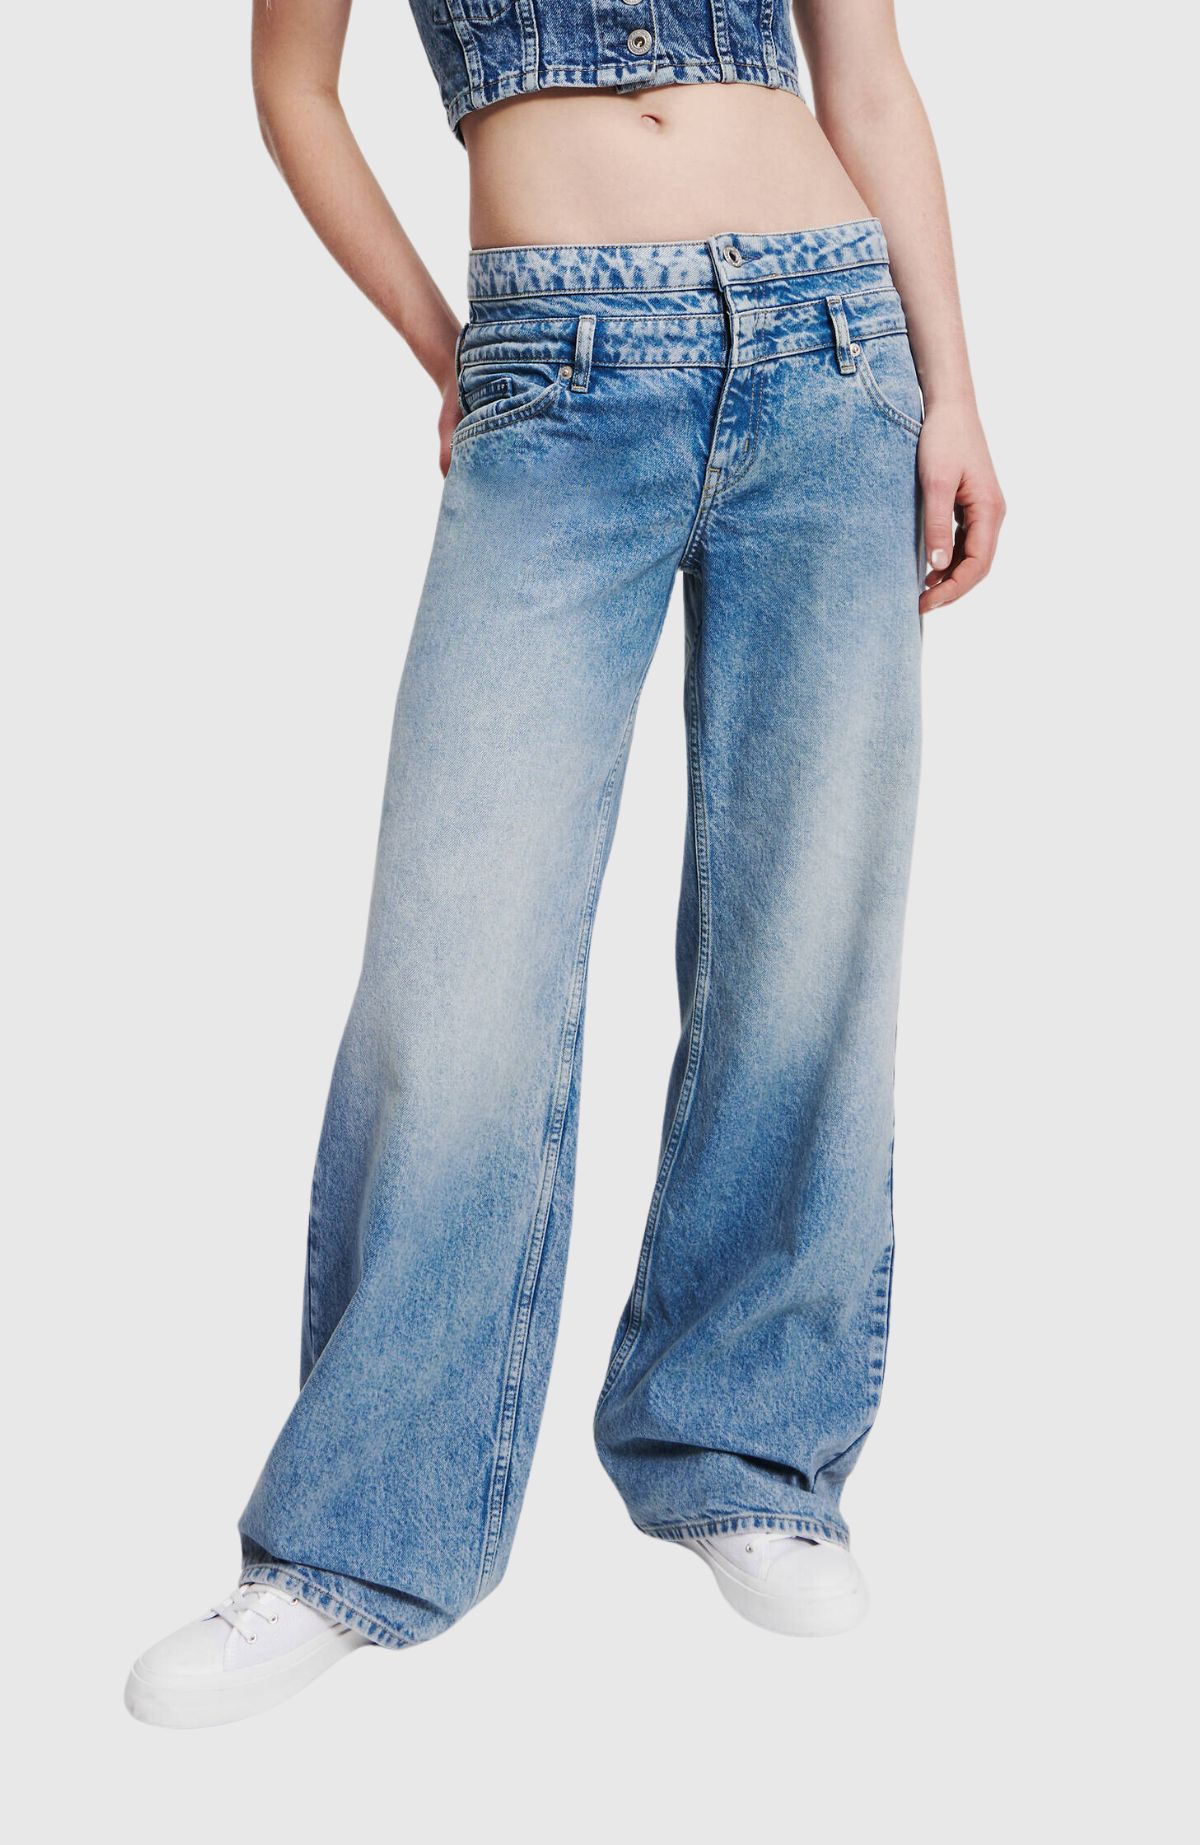 KLJ Relaxed Recycled Wb Denim